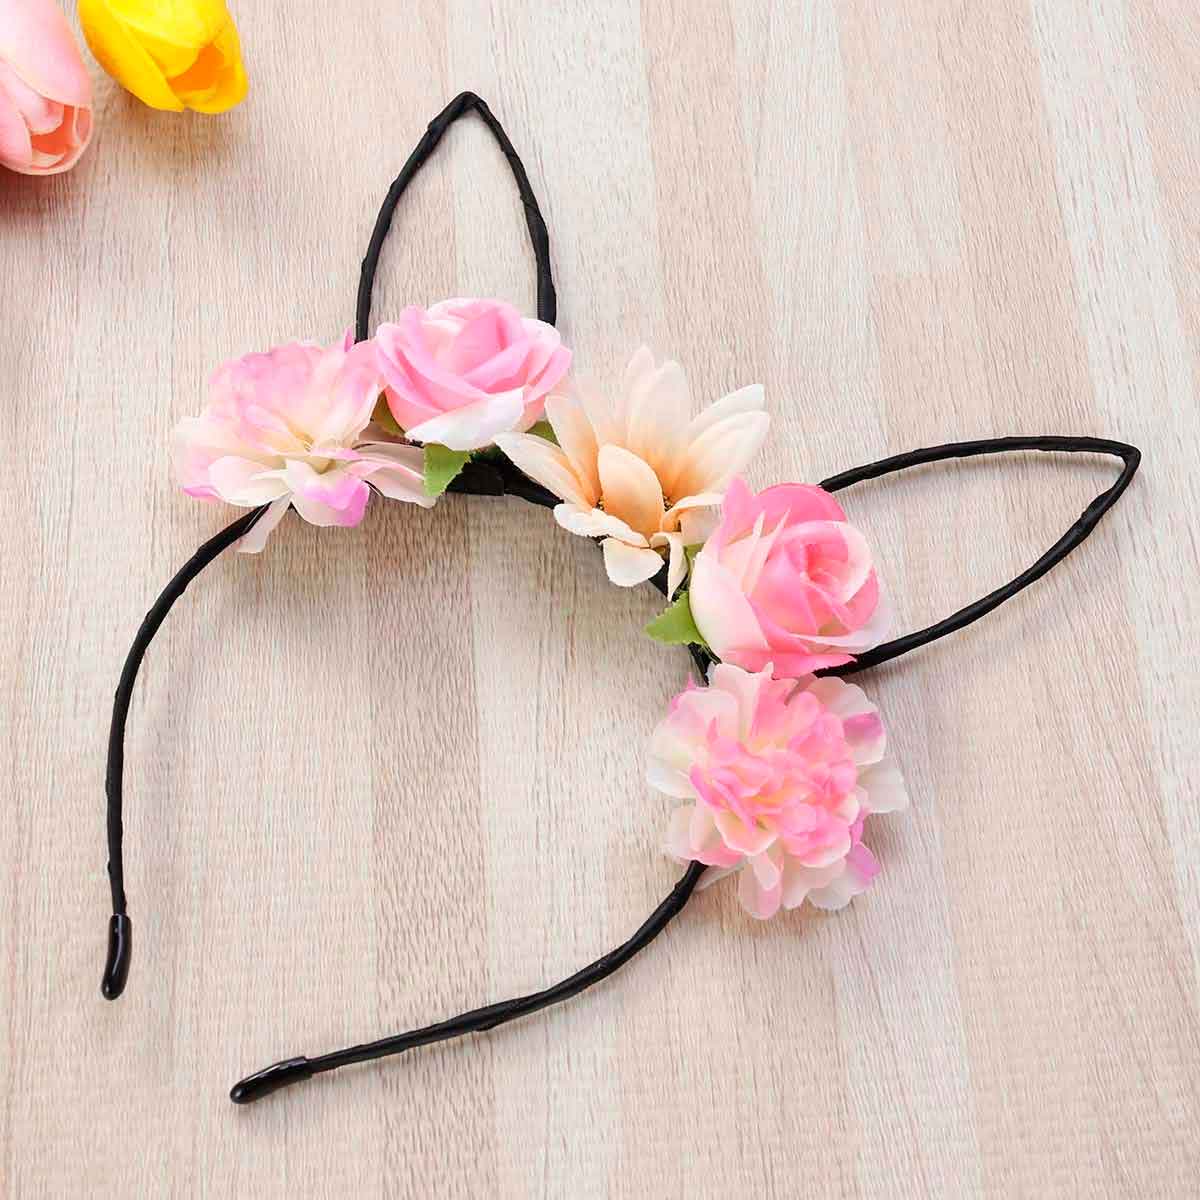 Hair Bands  Buy Hair Bands online at Best Prices in India  Flipkartcom